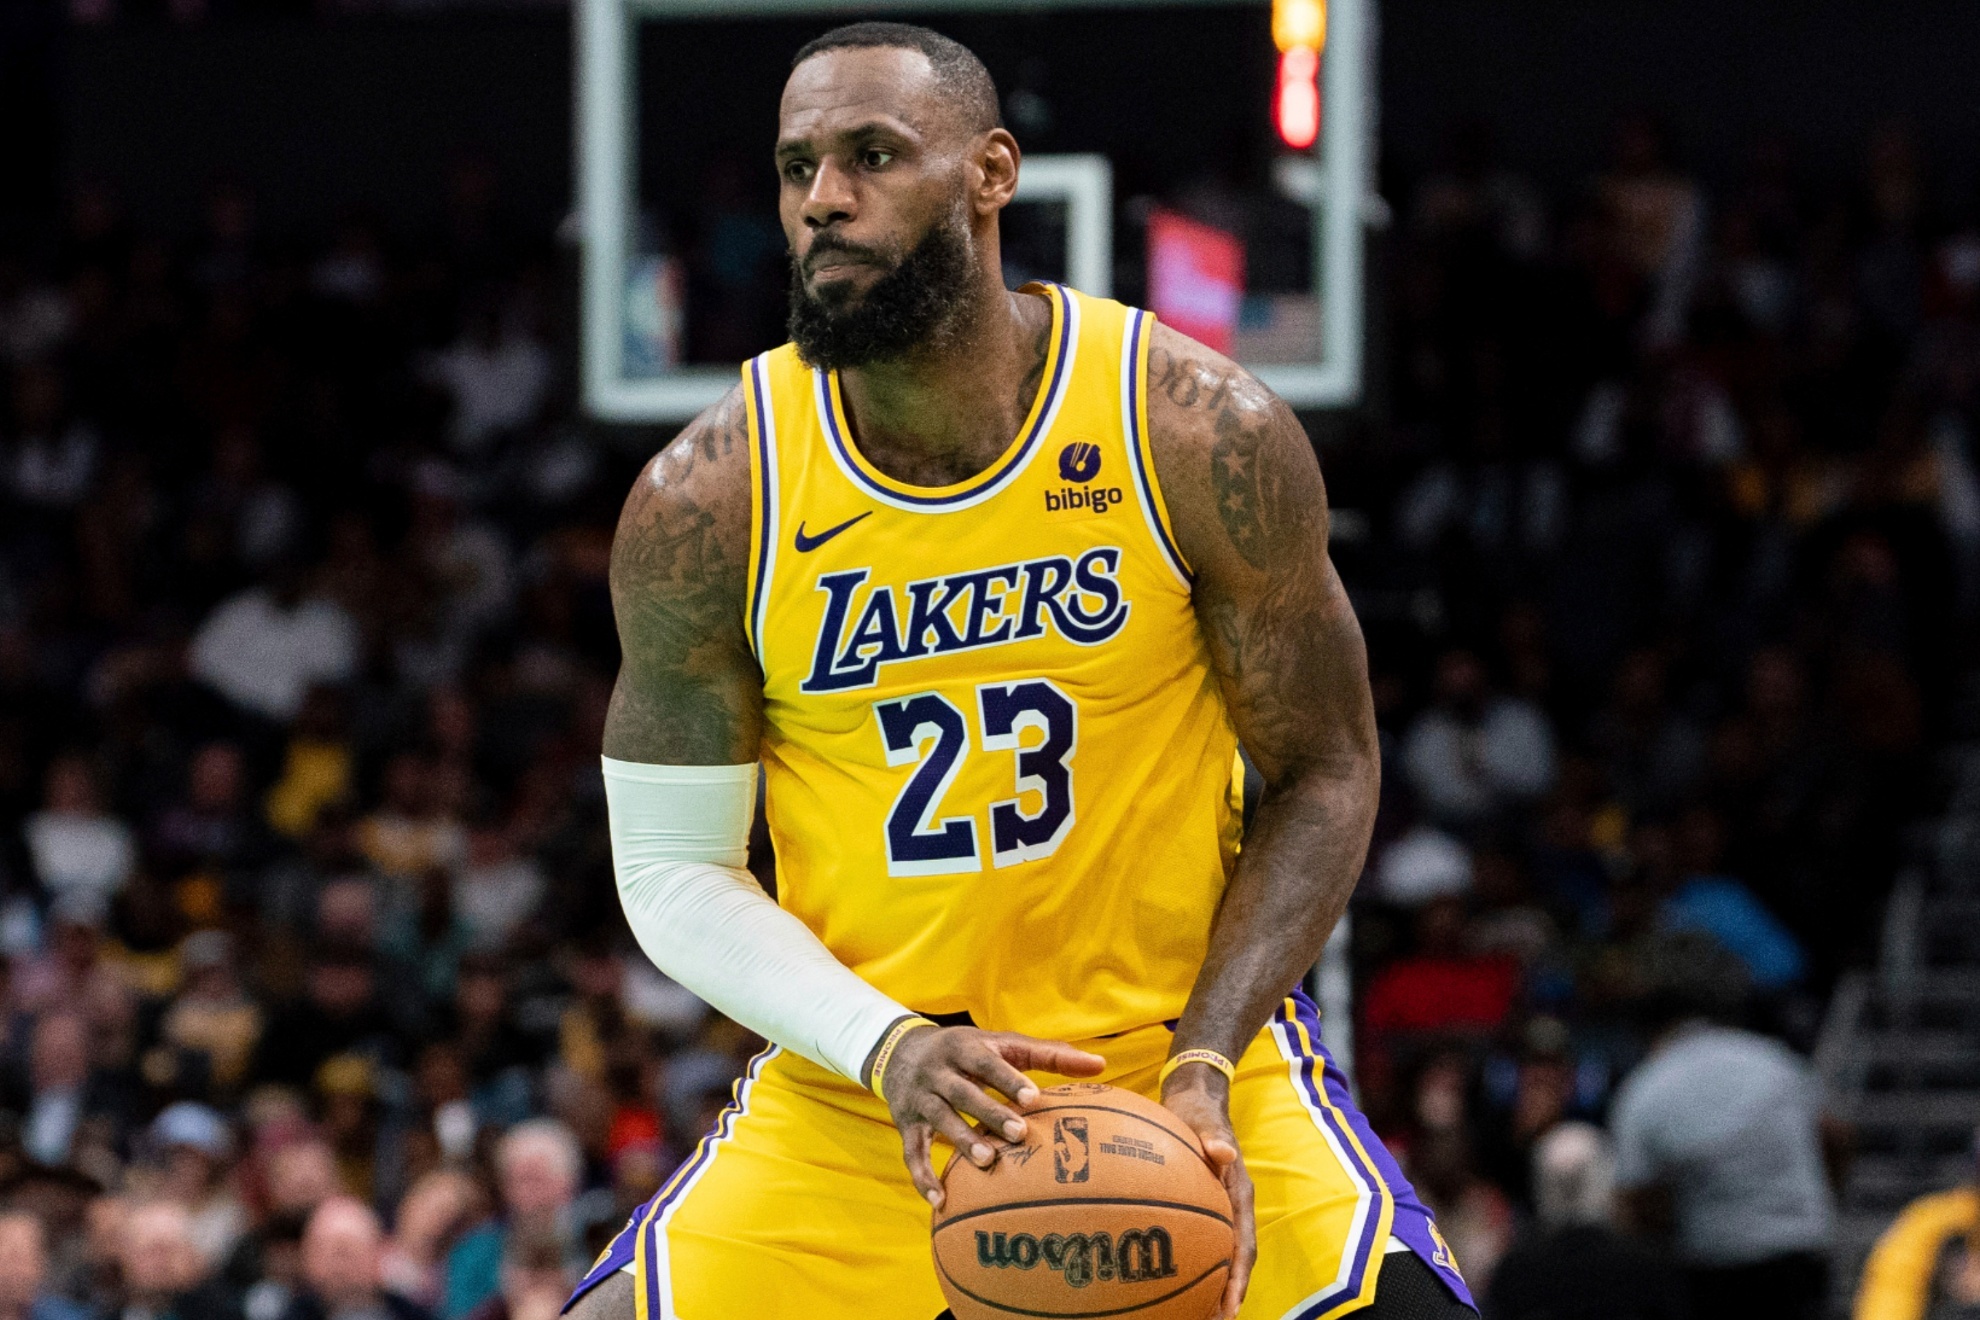 LeBron James is one of the hightes-earning NBA players in history